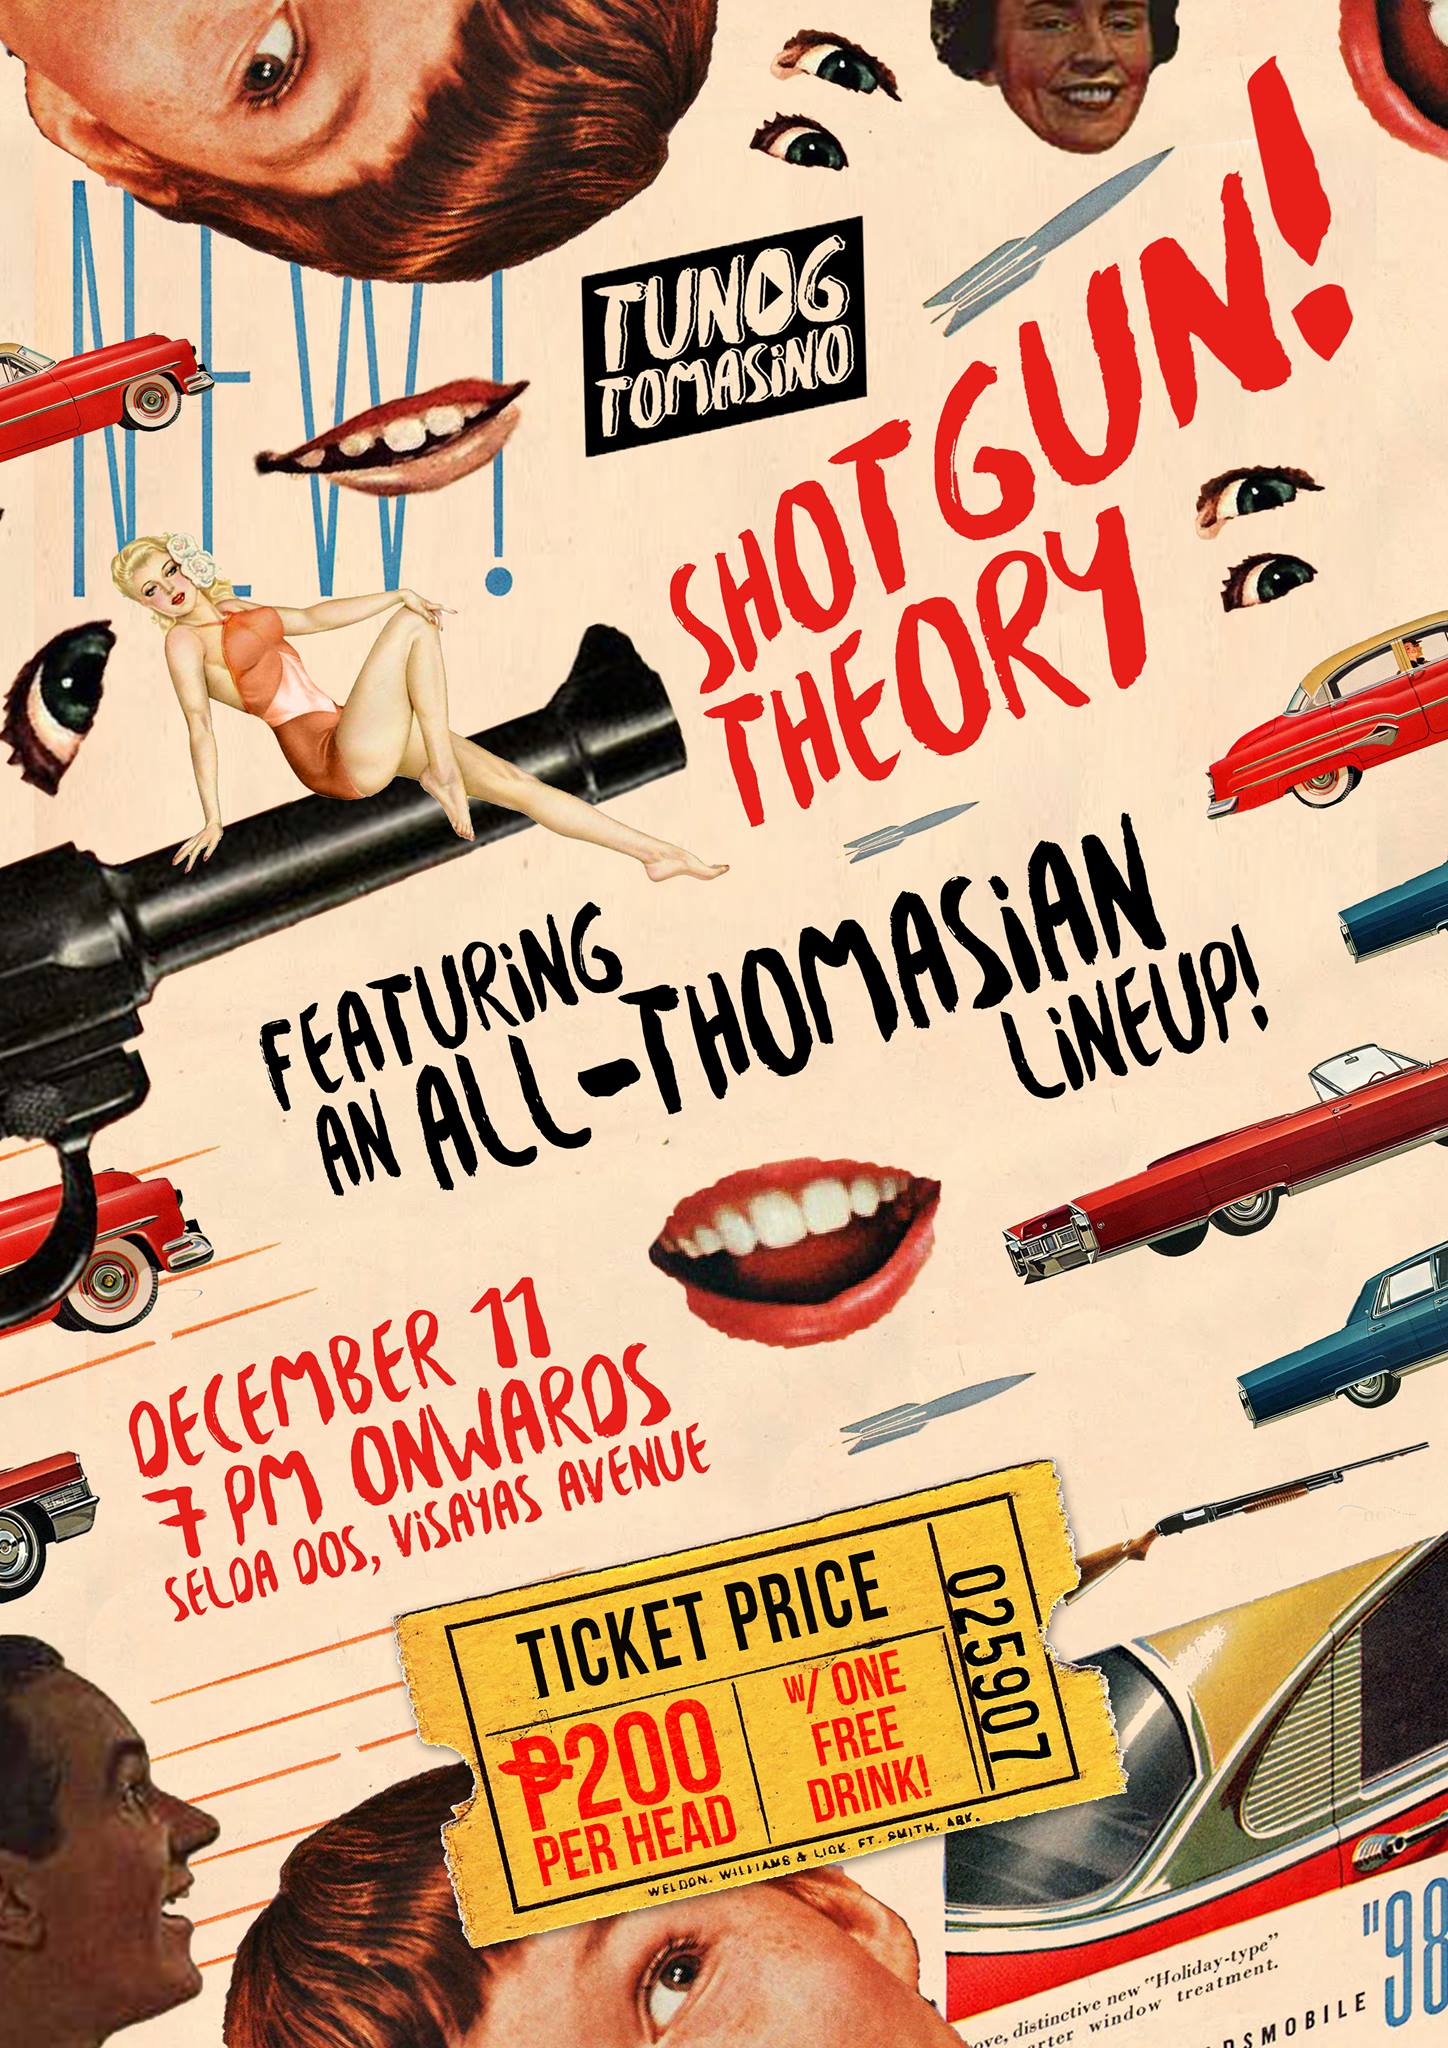 Shotgun! Theory clock Friday, December 11 at 7:00pm Next Week · 94°F / 74°F Clear pin Show Map Selda-Dos Visayas Avenue, Tandang Sora, Quezon City, Philippines Under the #TunogTomasino project, there's EN ROUTE: FUELED BY VERSES and now here's SHOTGUN! THEORY. We're bringing you a gig with an all-Thomasian line up, hoping to establish and promote our homegrown acts. SHOTGUN! THEORY December 11, 2015 Selda Dos (Visayas Avenue) 7PM onwards Php200 entrance with one free drink THE MODERN PLAYGROUND MILESEXPERIENCE + More to be announced! WHERE TO BUY TICKETS: 1) TYK 4N, look for us! 2) Venue itself *OPEN FOR NON-THOMASIANS See you there! :)